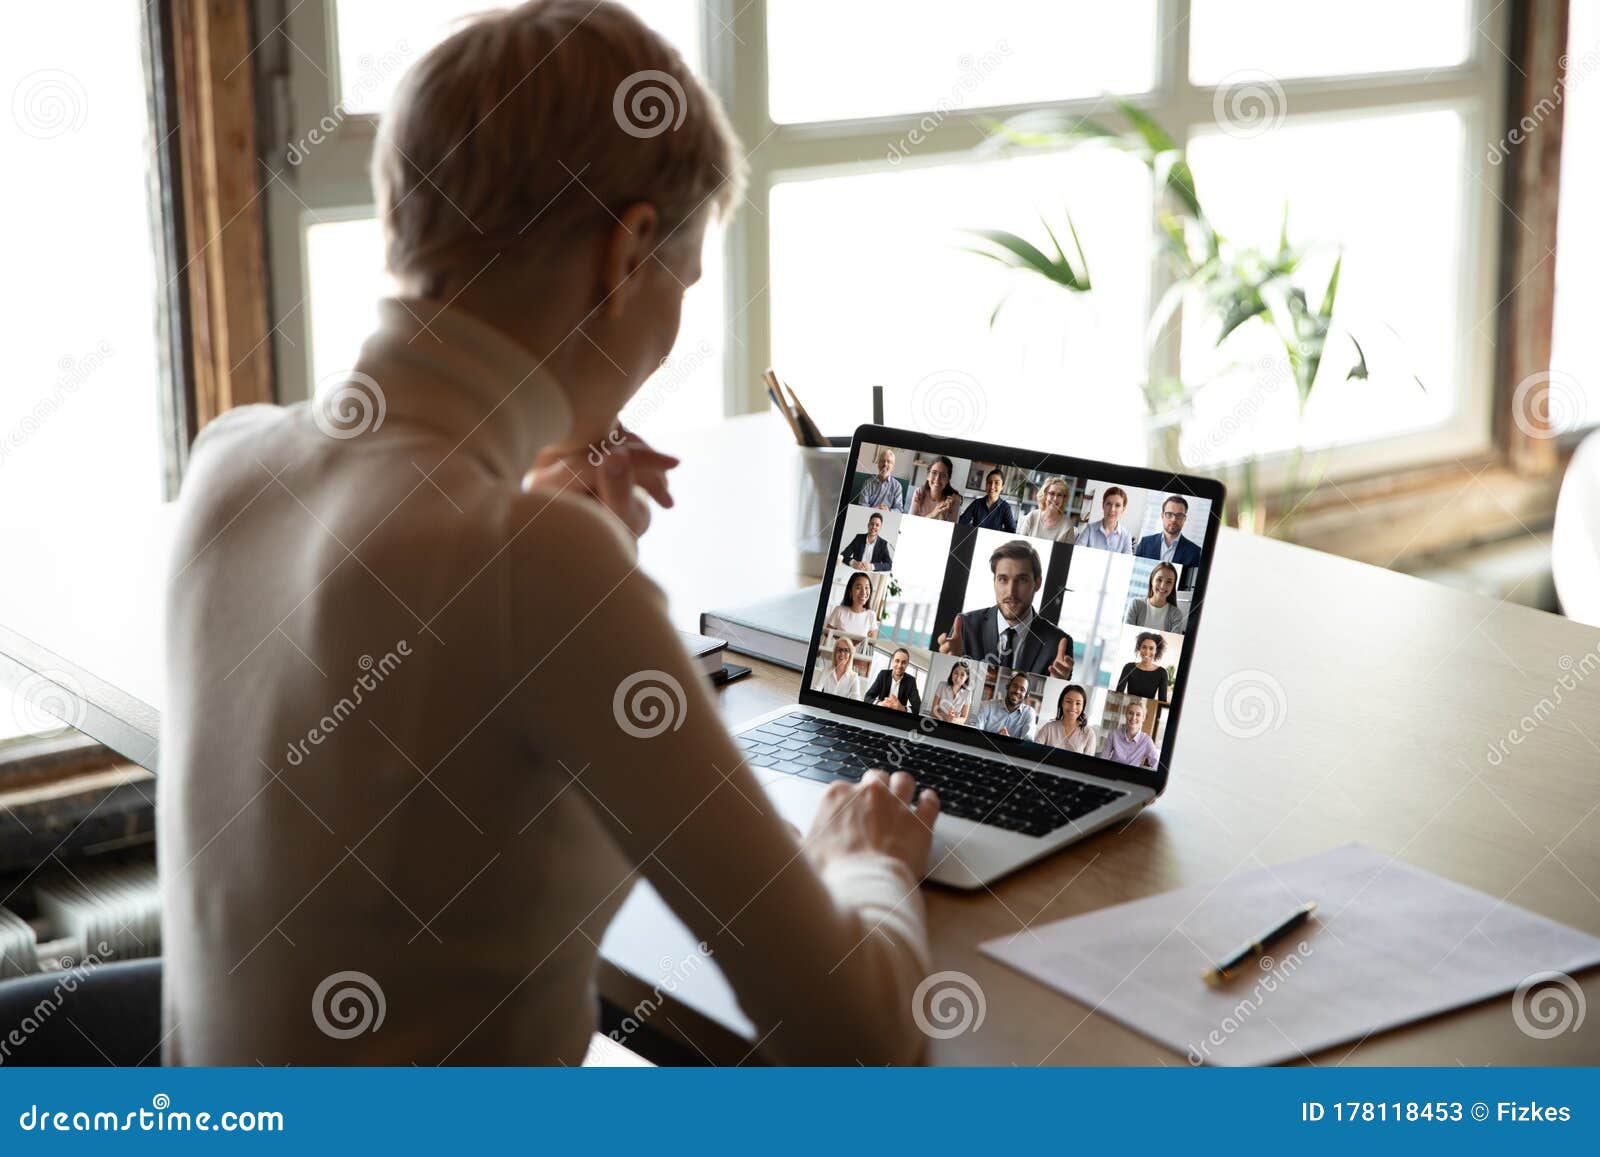 woman sitting at desk watching new videoconference application online review